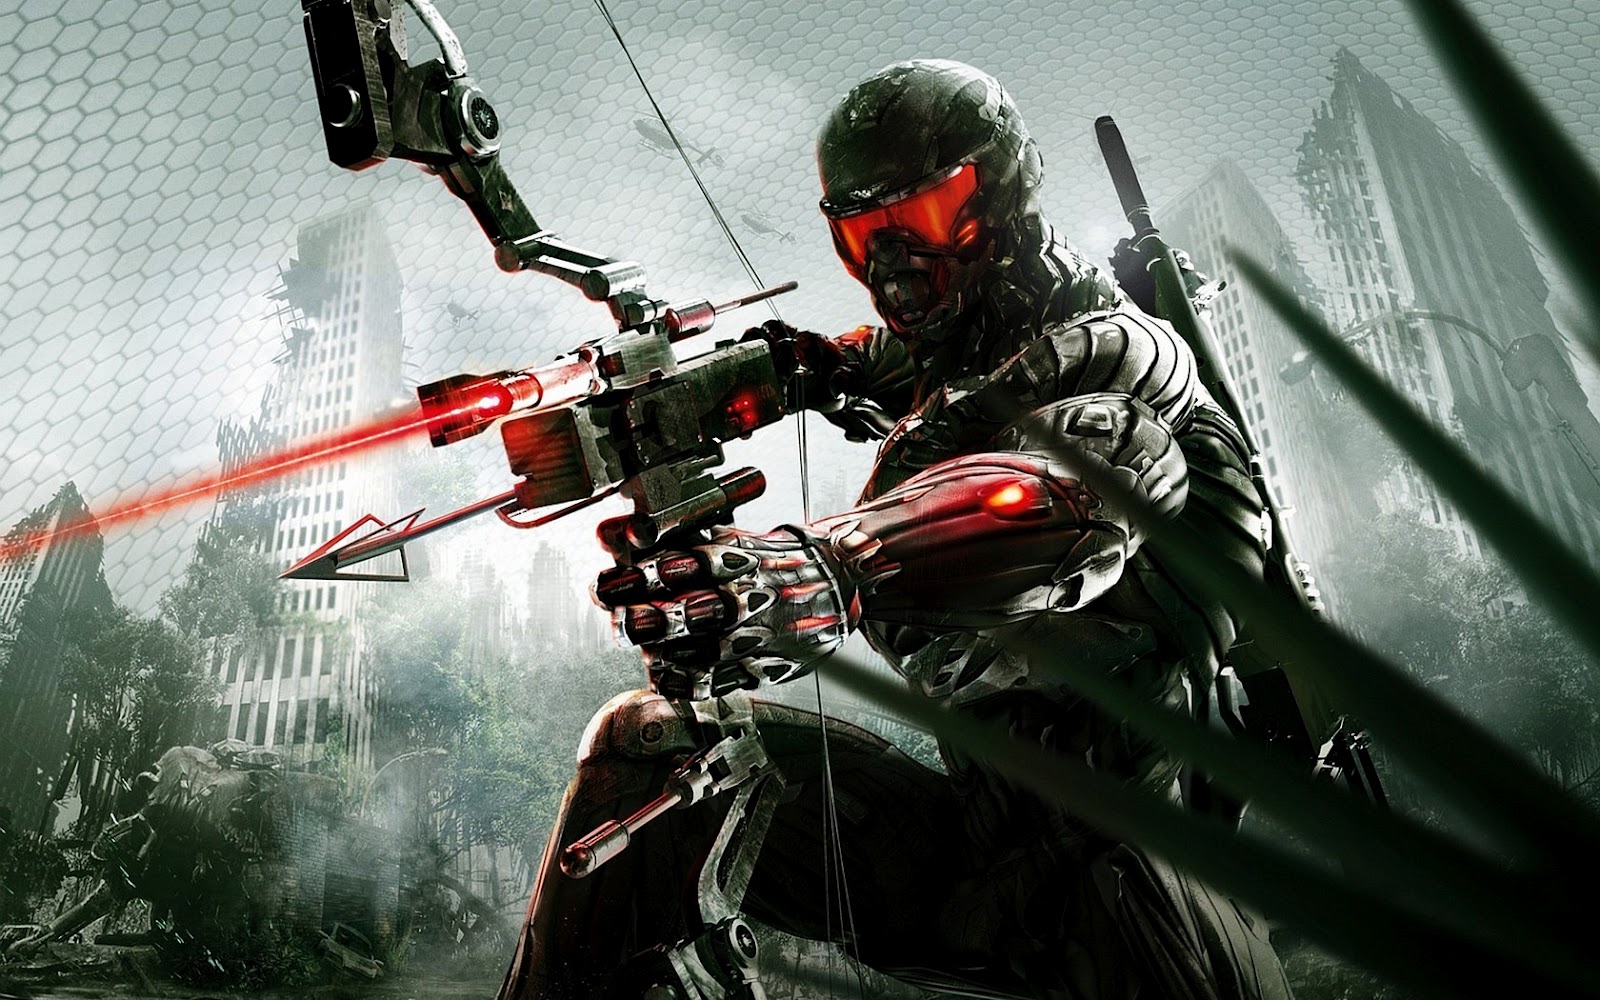 Central Wallpaper Crysis New Game HD And Dvd Cover